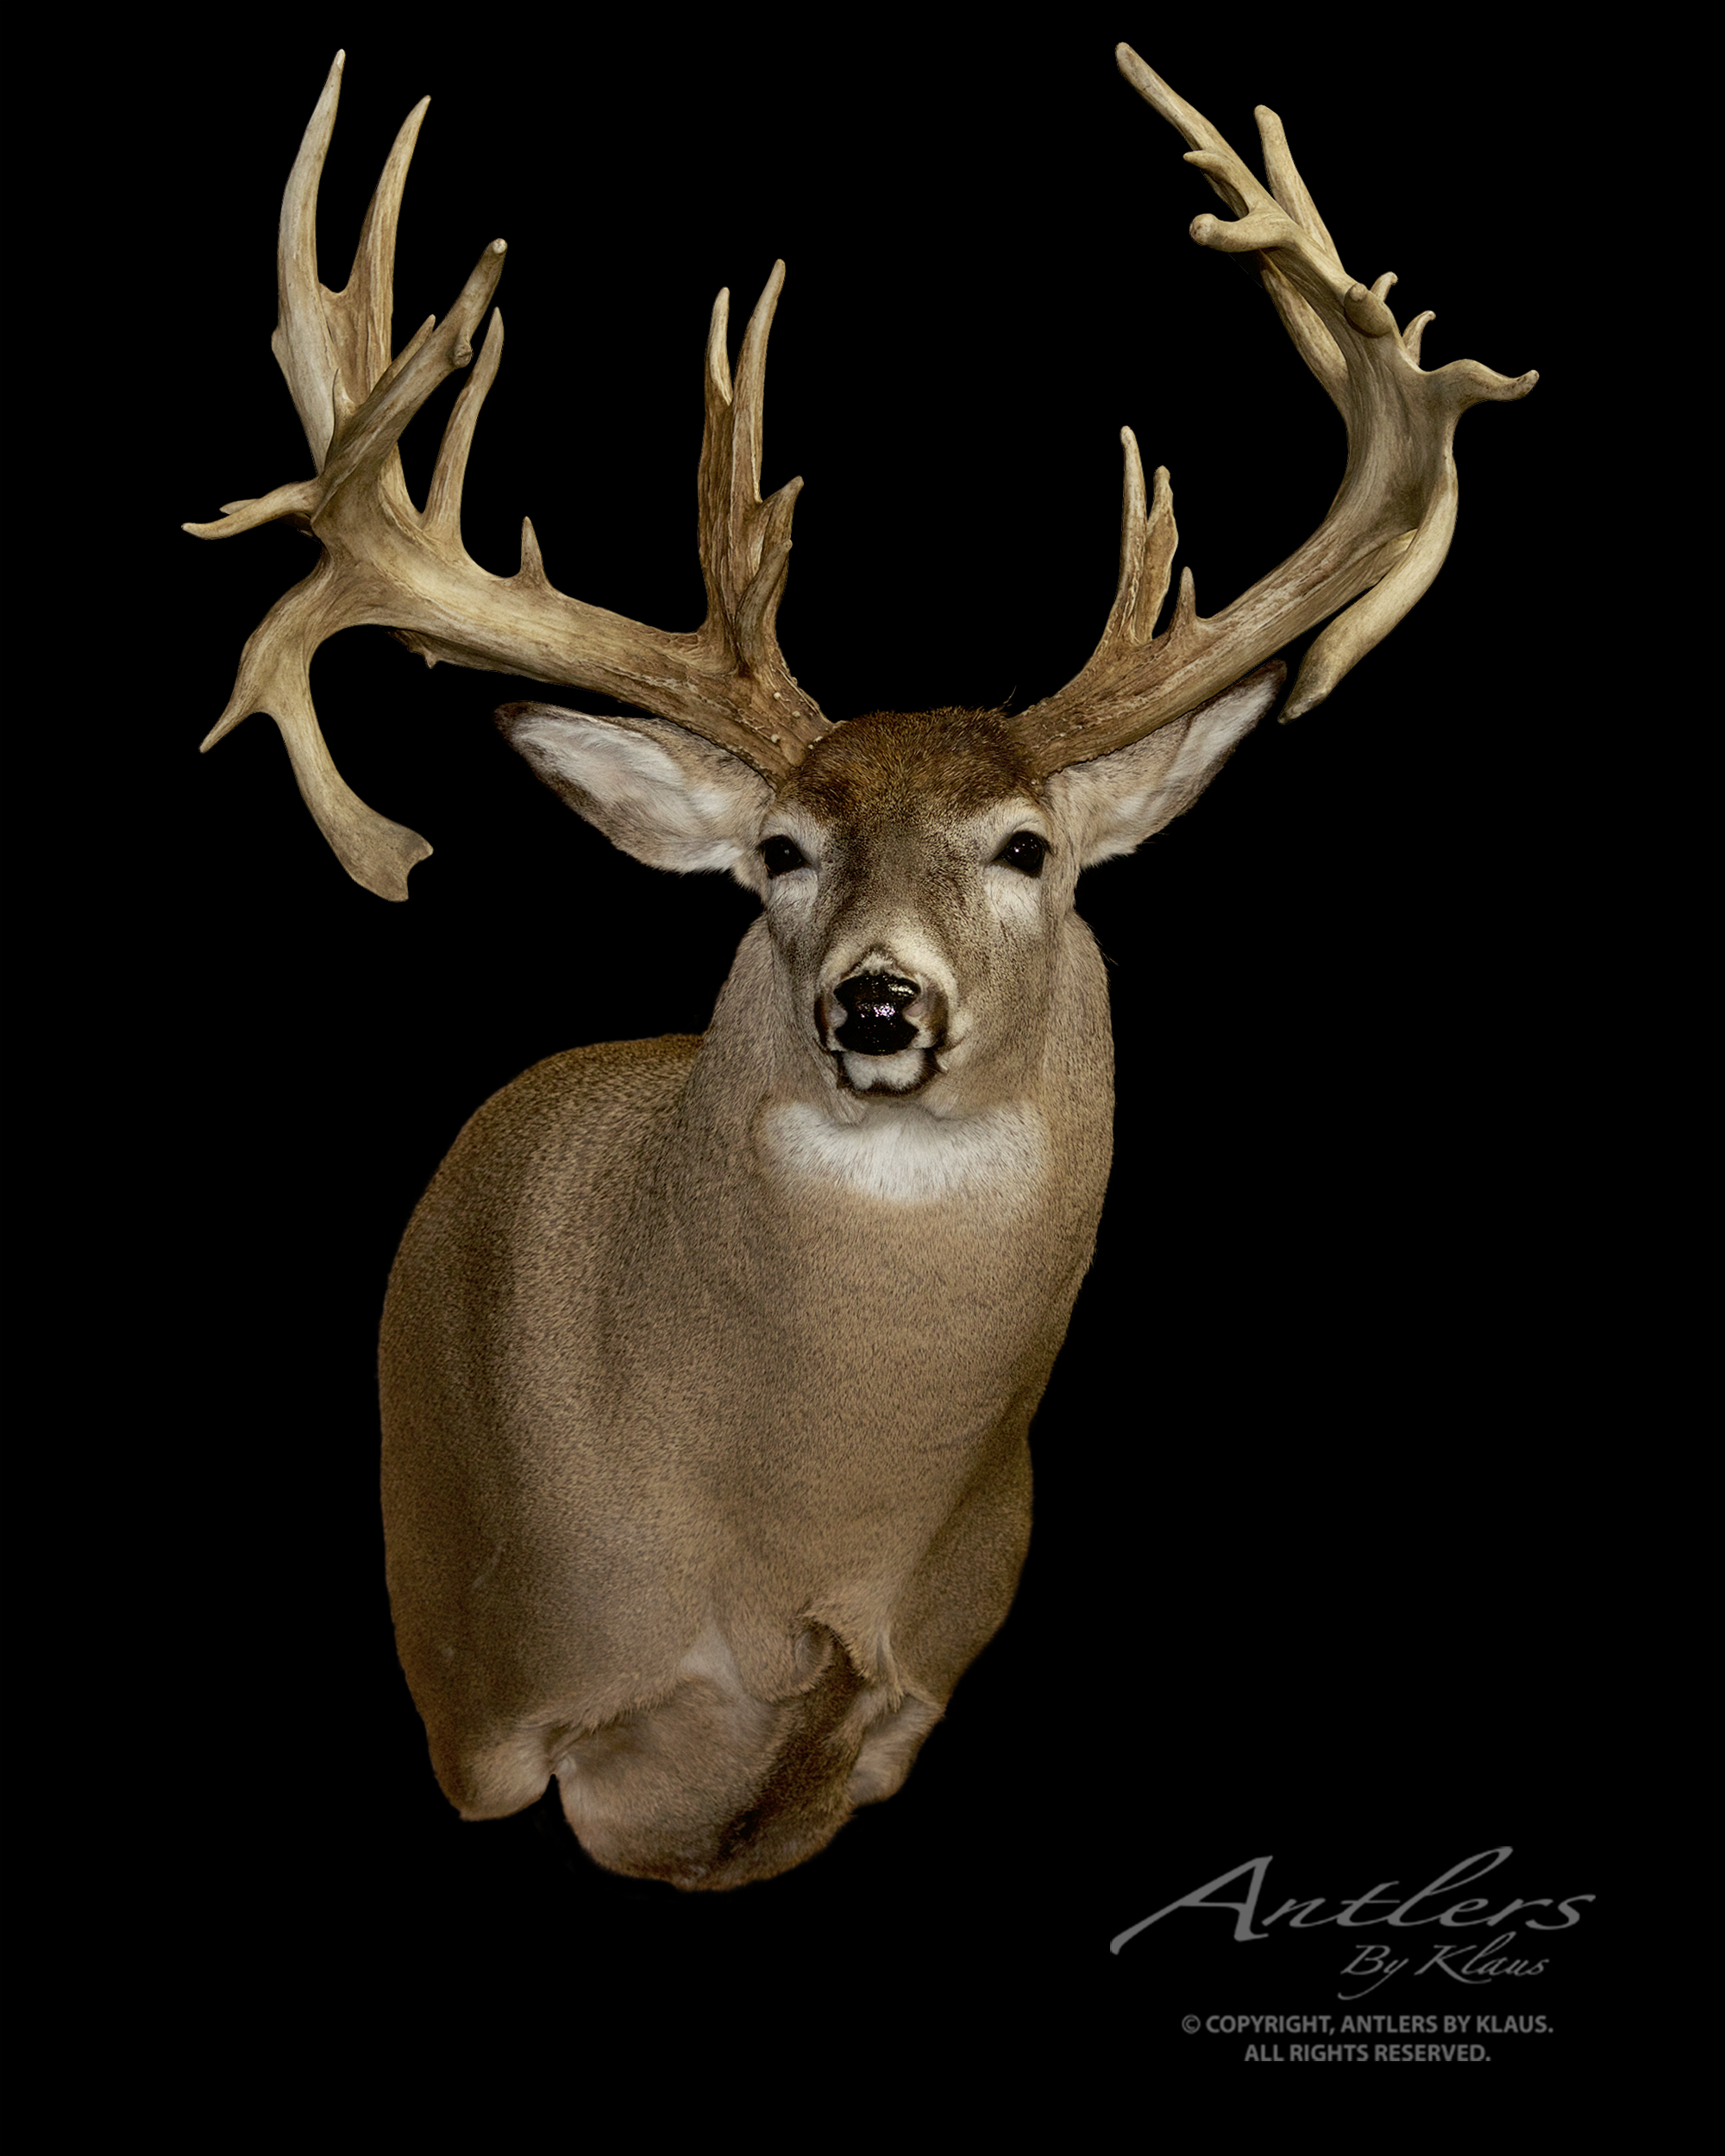 Texas High Tower Sheds - Antlers by Klaus